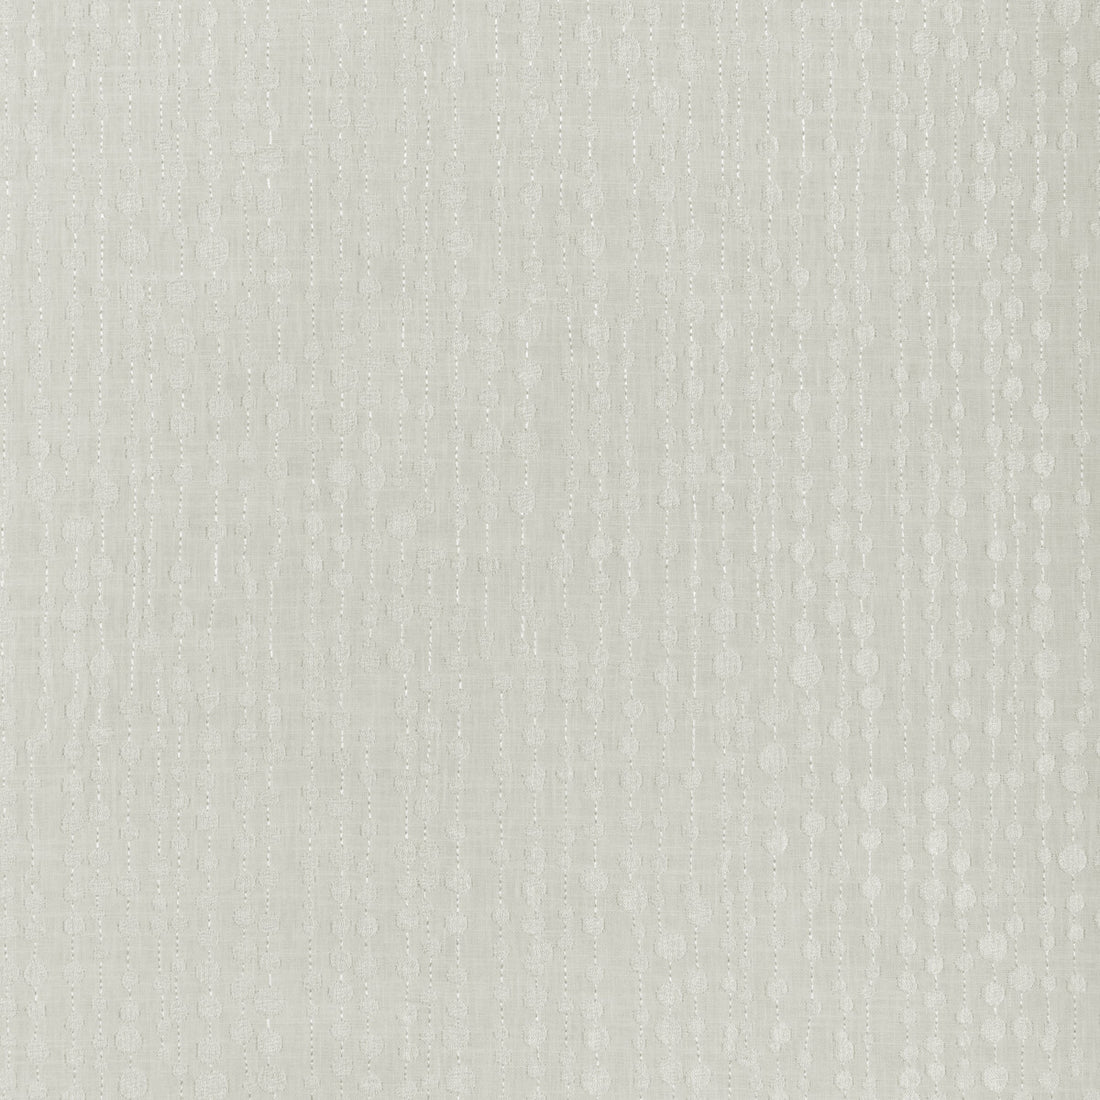 String Dot fabric in ivory color - pattern 36953.101.0 - by Kravet Basics in the Mid-Century Modern collection